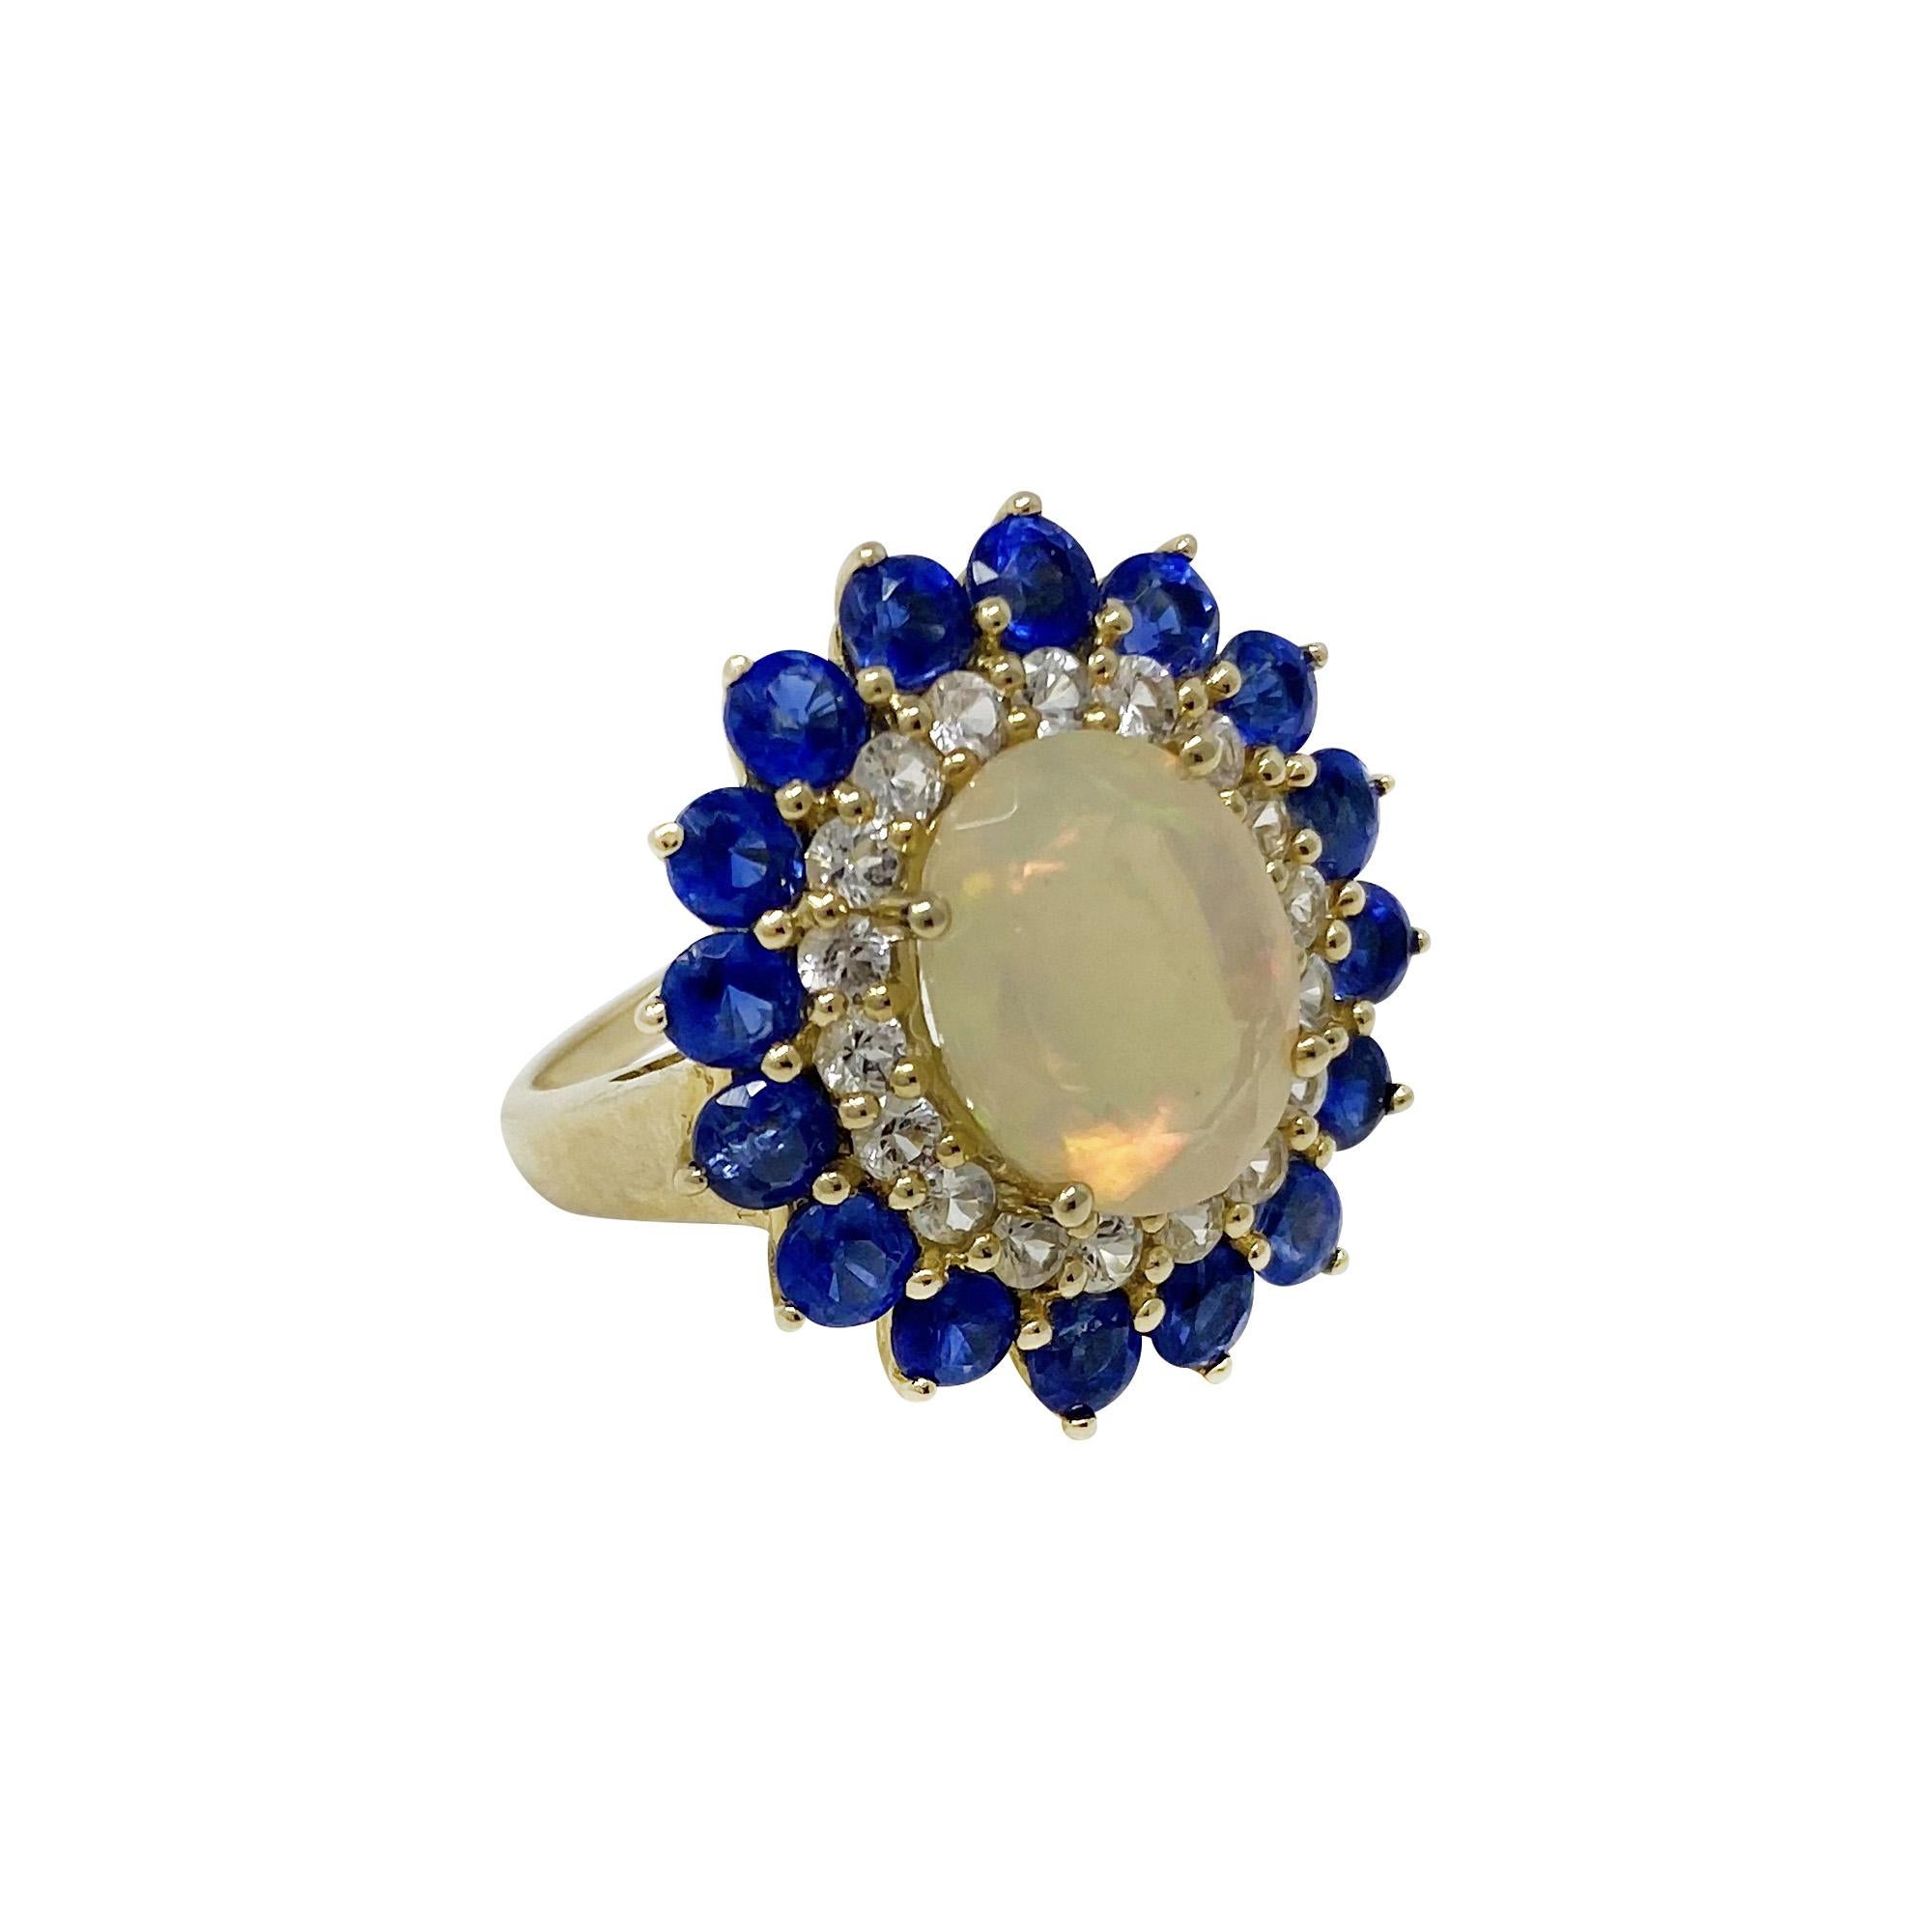 Such a big look!  These colors are stunning together!  In 14 karat yellow gold, the cabochon-cut opal is surrounded by white sapphires and kyanite.  Size 7 1/4. 